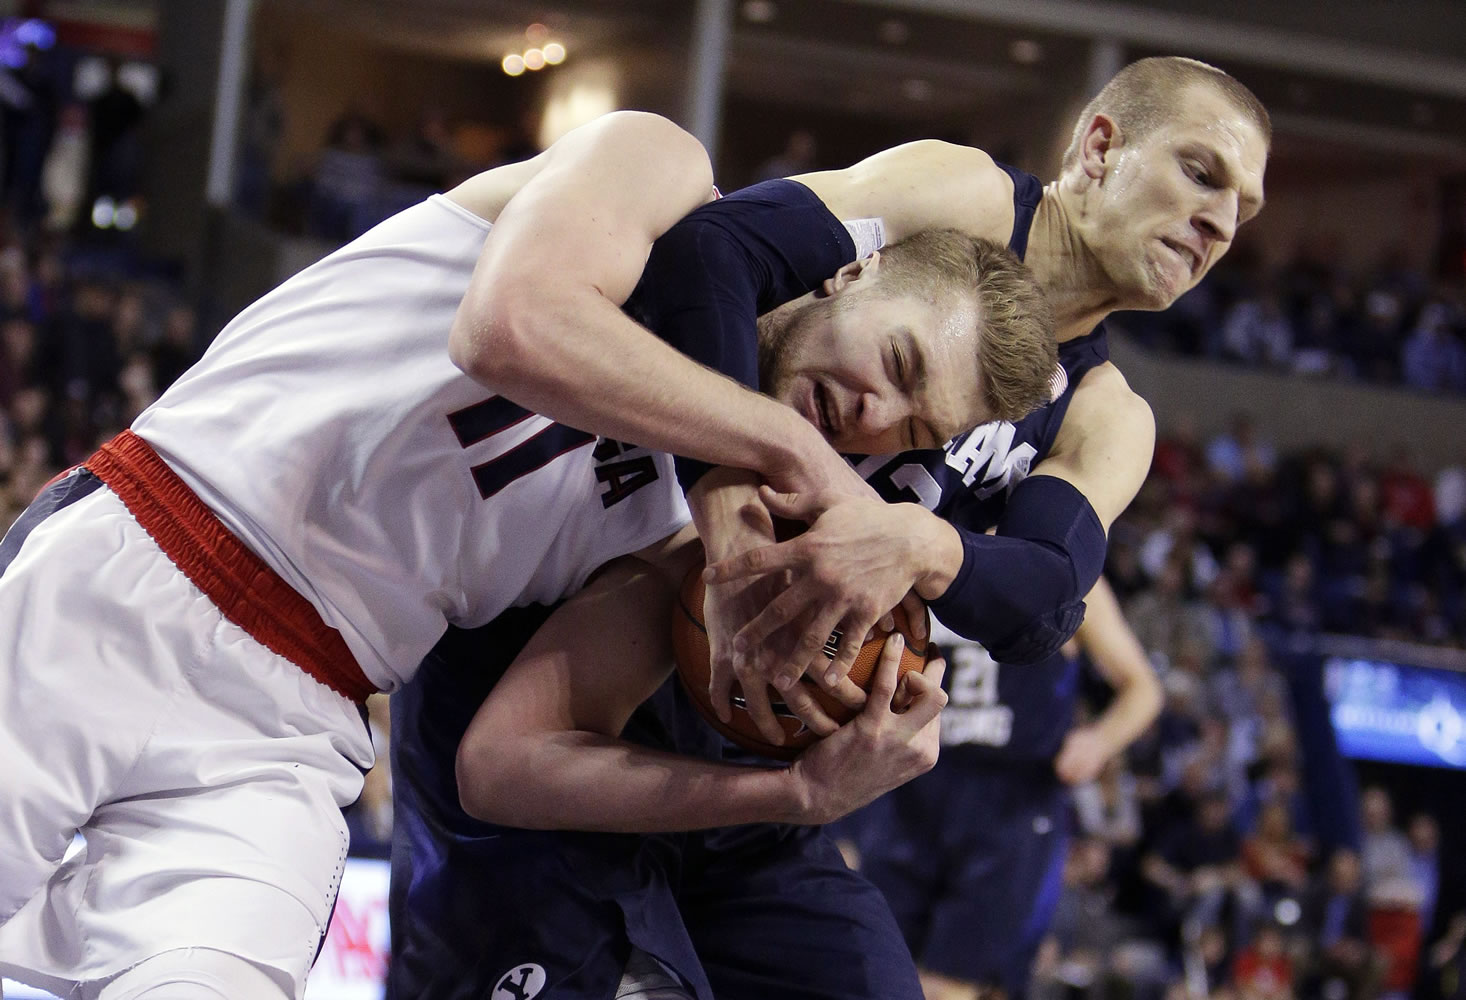 Gonzaga's Domantas Sabonis (11) and BYU's Nate Austin go after a rebound during the first half of an NCAA college basketball game, Thursday, Jan. 14, 2016, in Spokane, Wash.